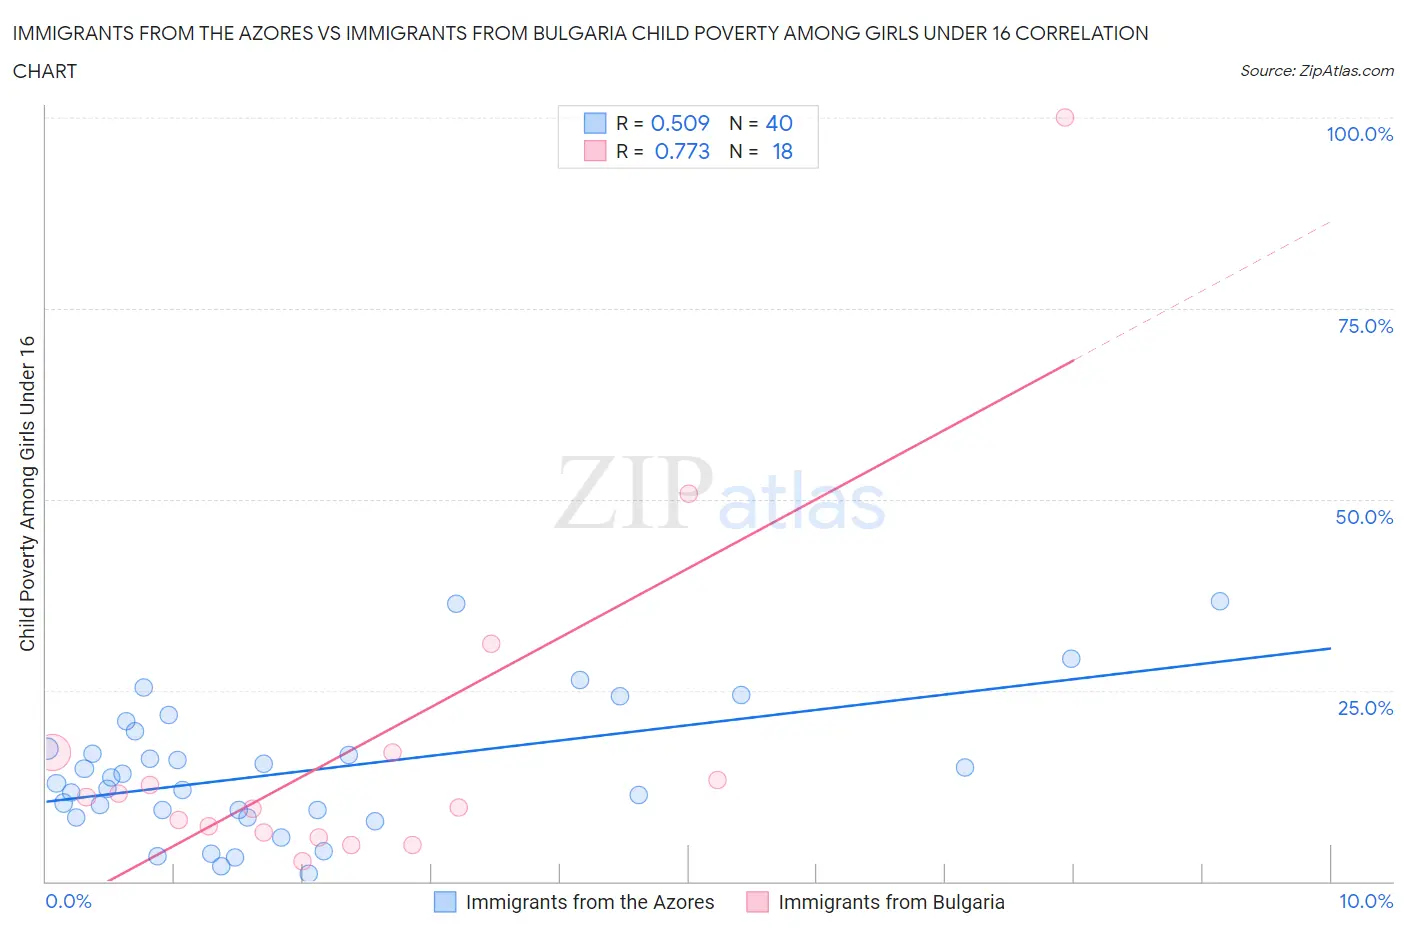 Immigrants from the Azores vs Immigrants from Bulgaria Child Poverty Among Girls Under 16